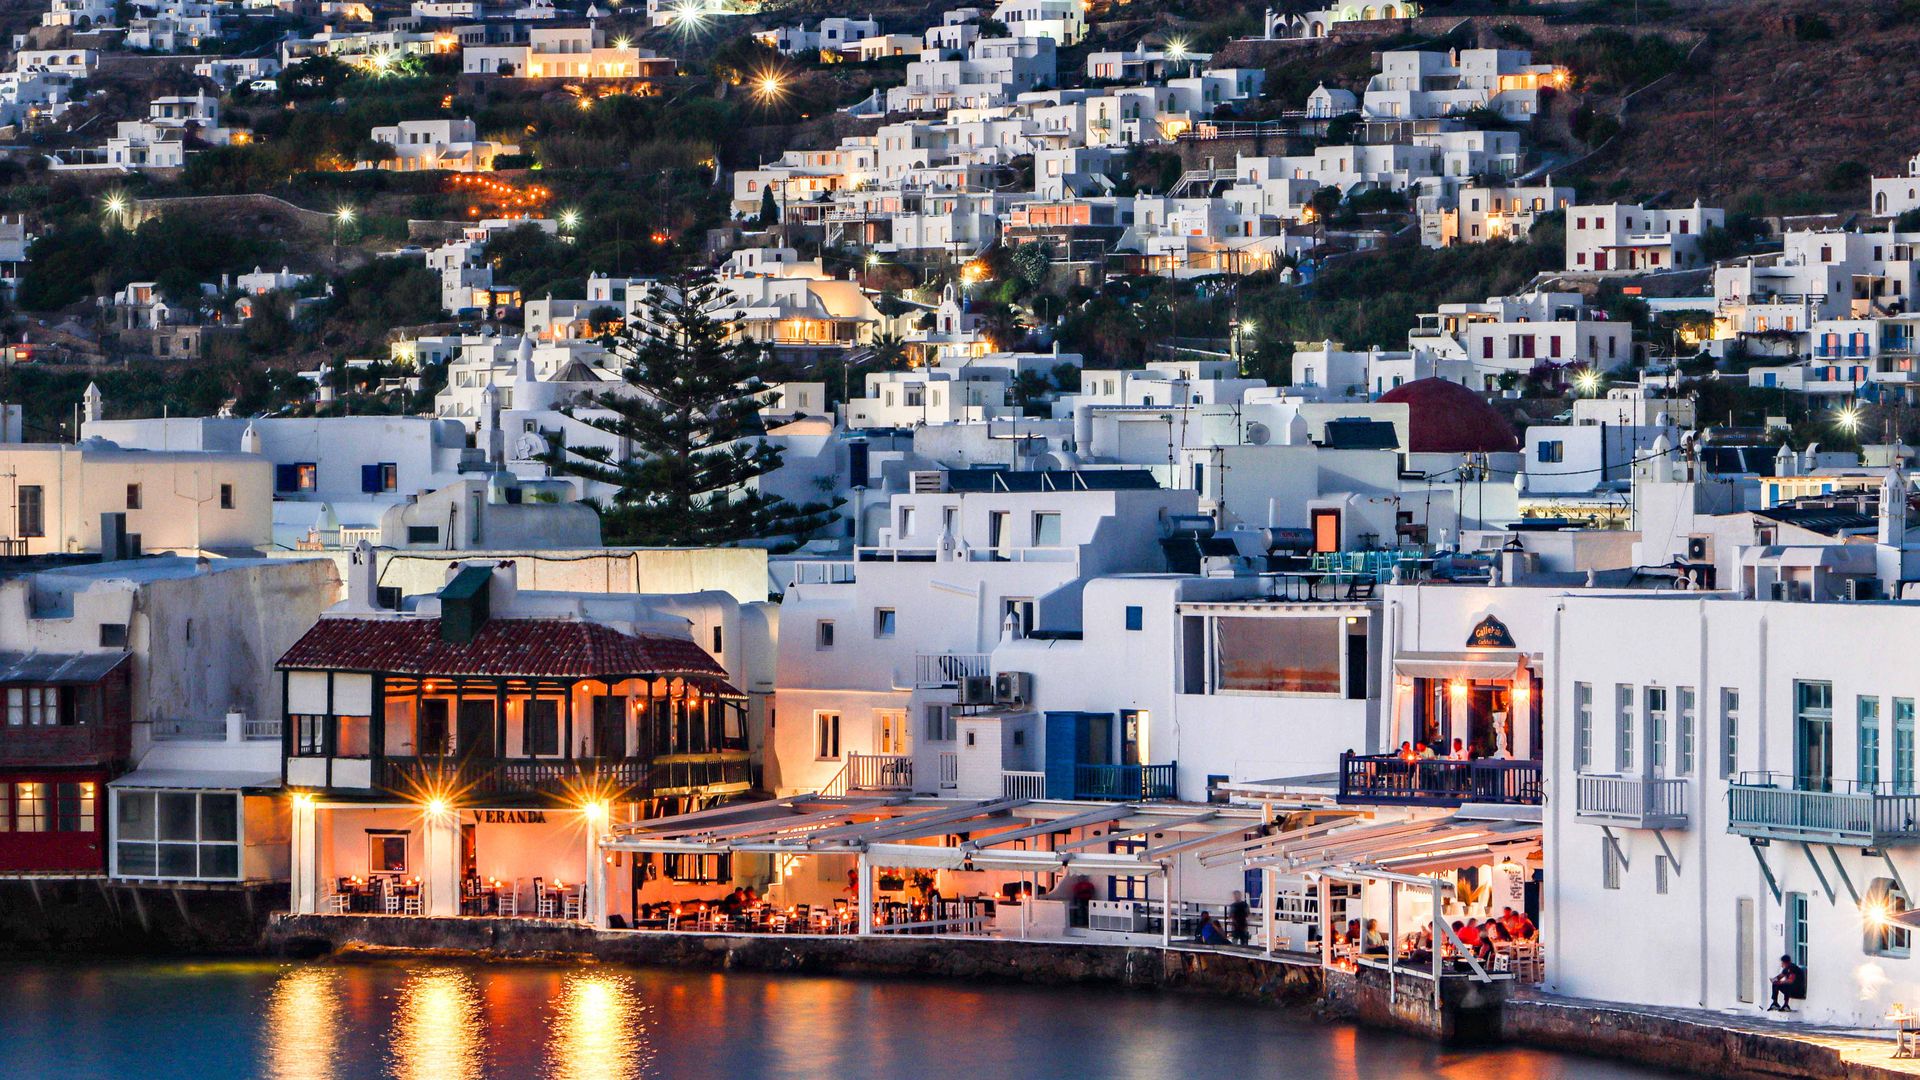 Magic hour during sunset and dusk at Little Venice in Mykonos island, one of the most romantic places in the Mediterranean island on July 14